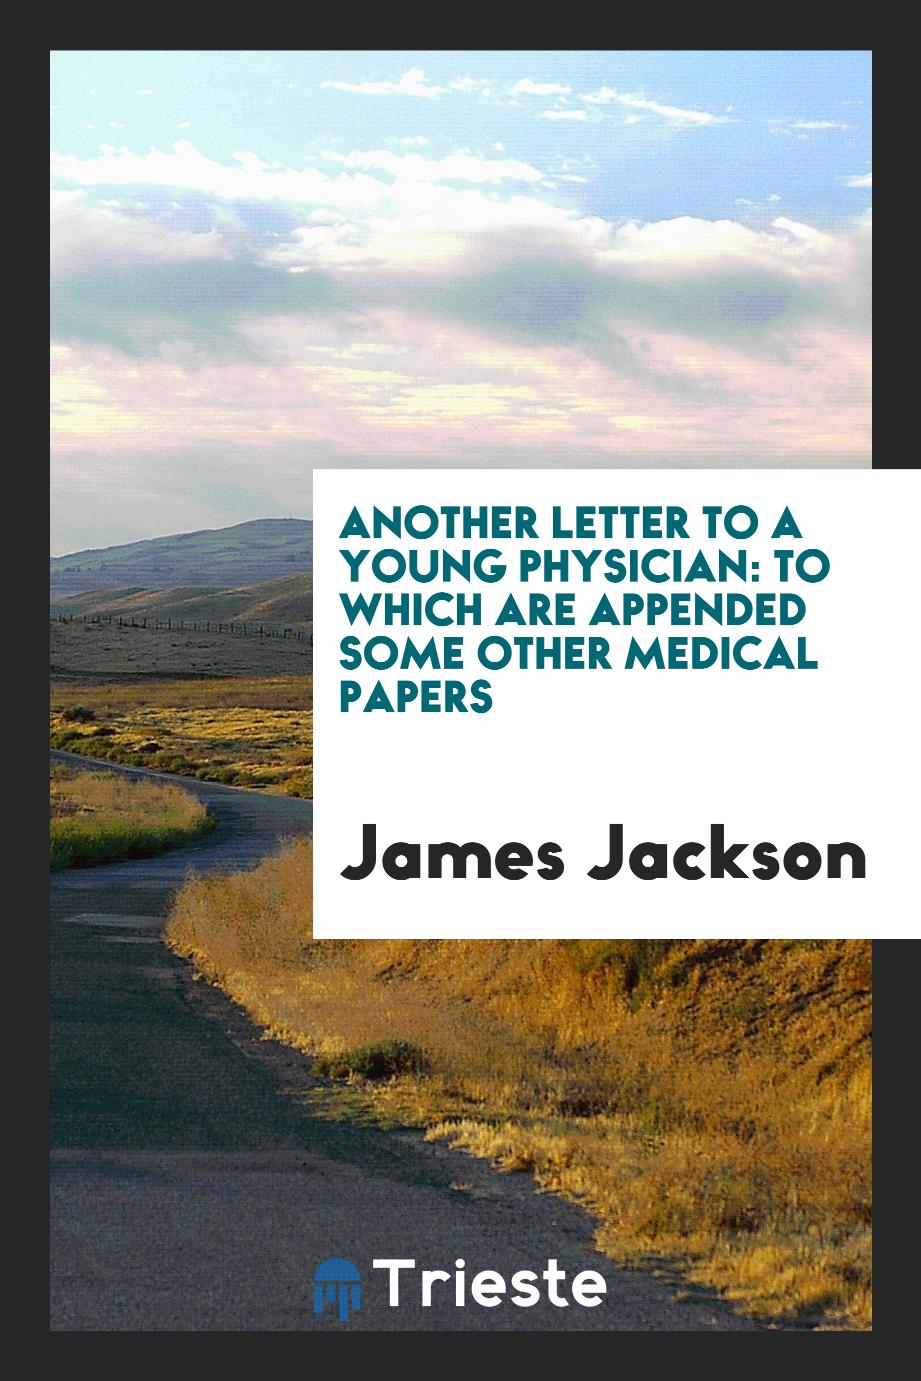 Another letter to a young physician: to which are appended some other medical papers